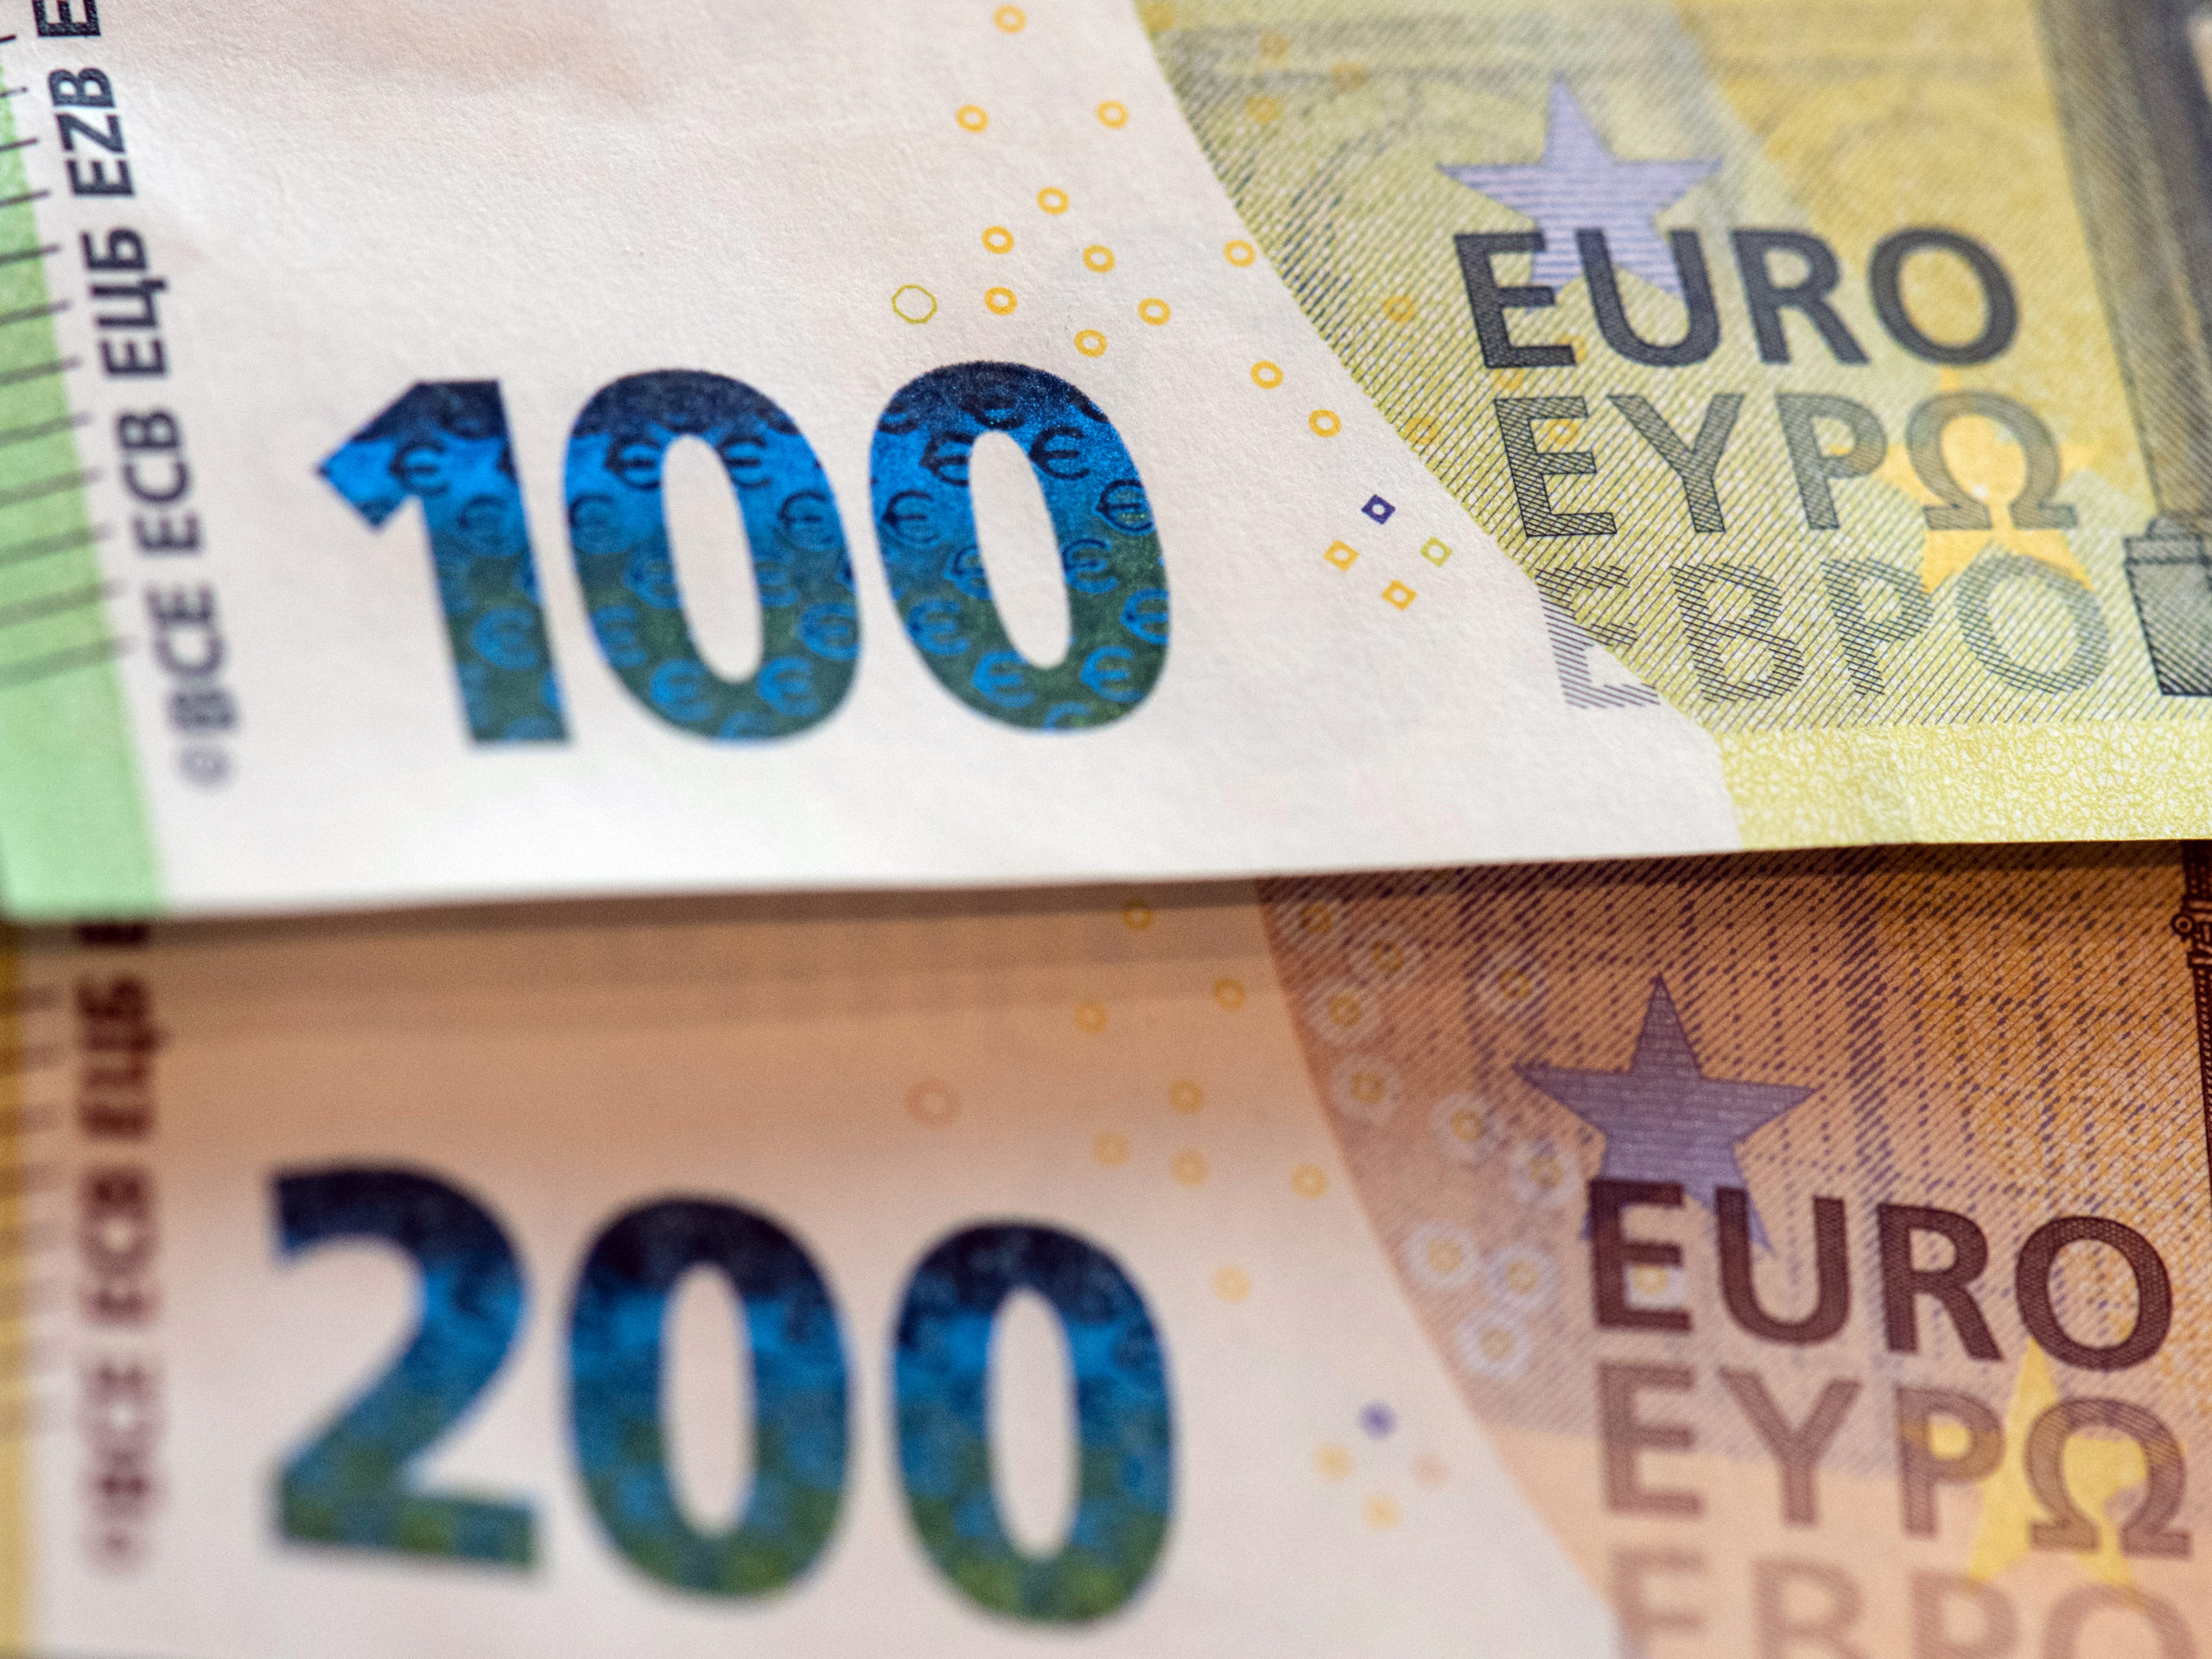 Reader question: Why haven’t I received my €300 payment yet in Germany?